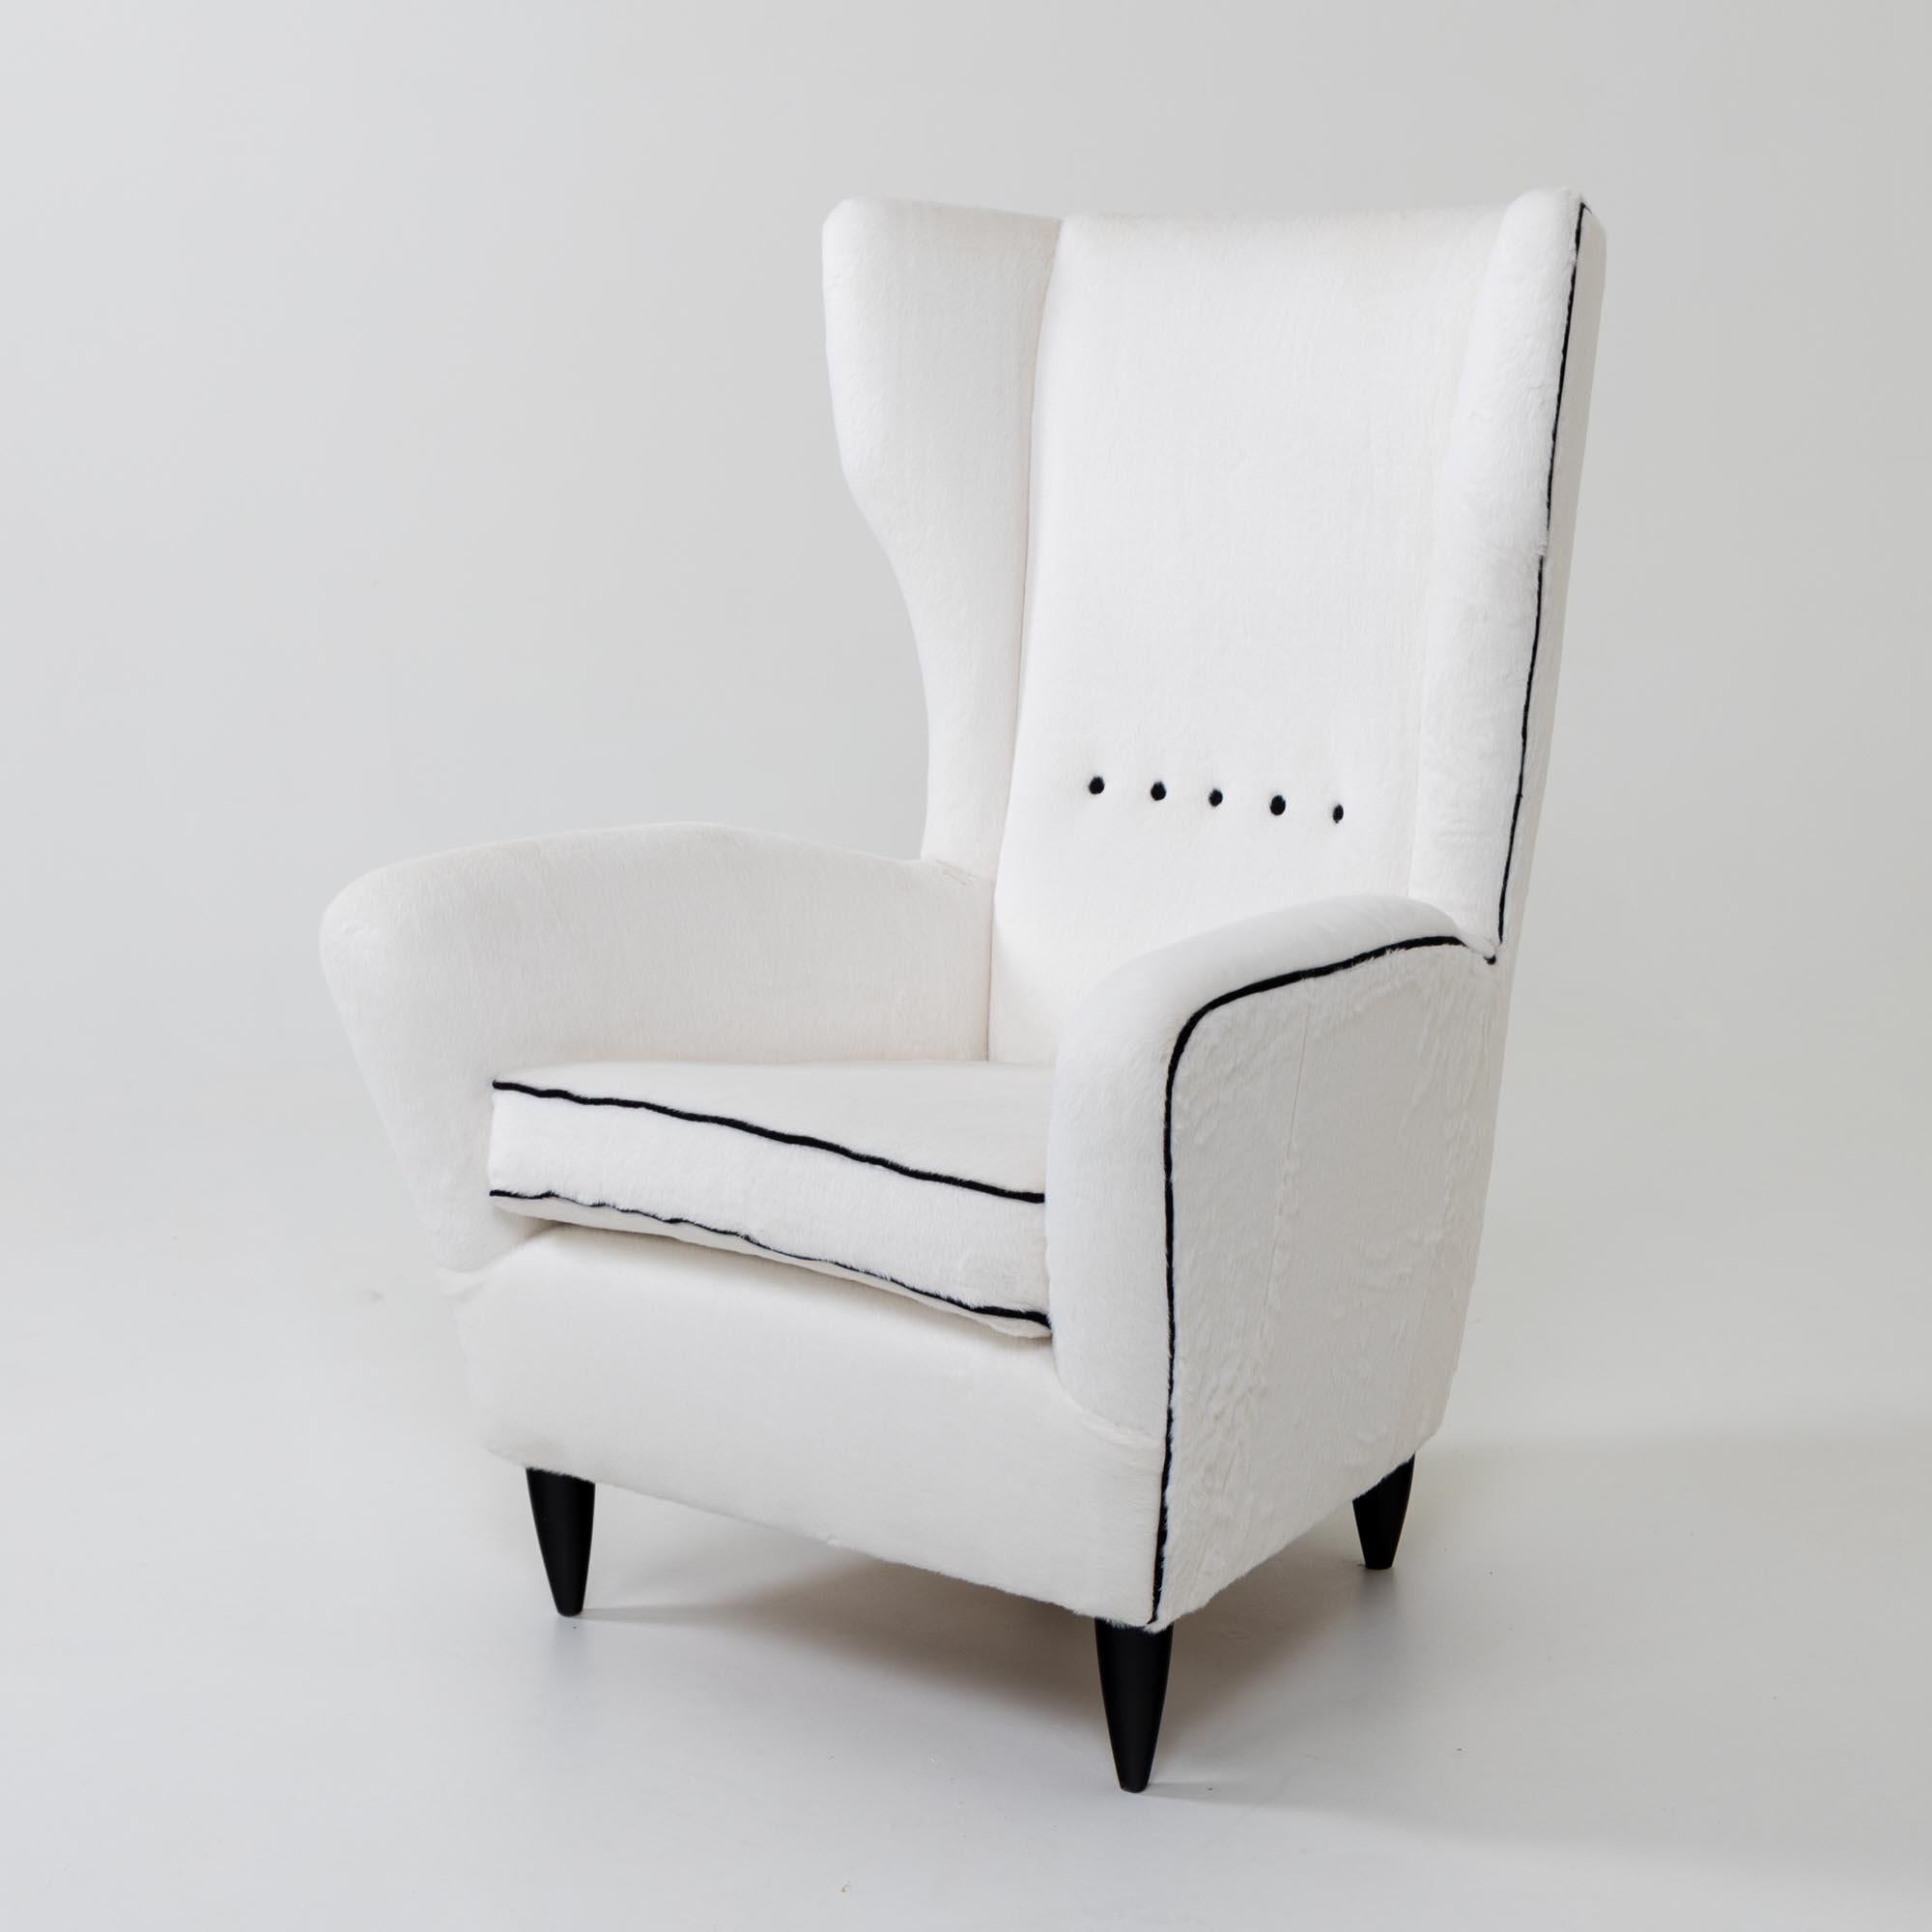 Large wingback armchair on conical black pointed feet. The armchair has been newly upholstered with a high-quality white imitation fur and accentuated with black piping and buttons.